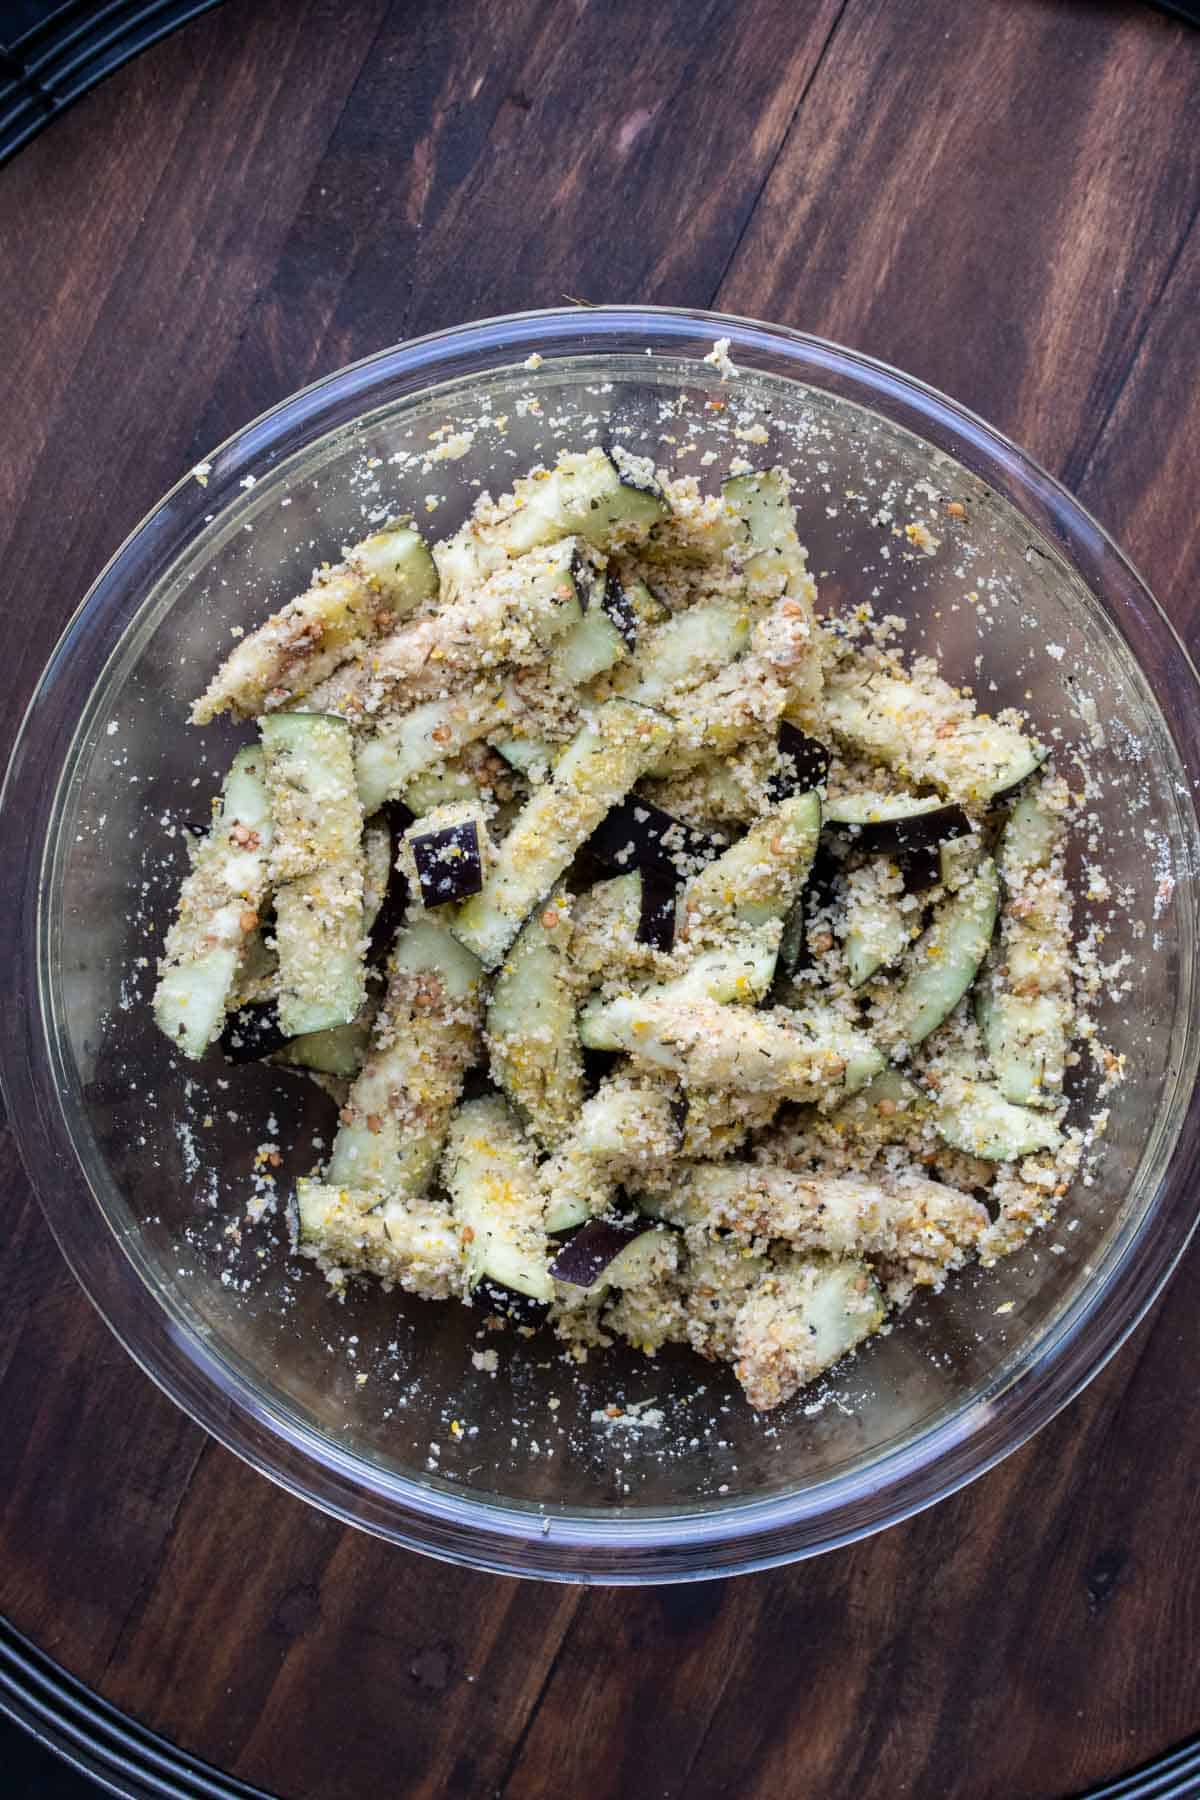 Eggplant sticks covered in crispy topping in a glass bowl.